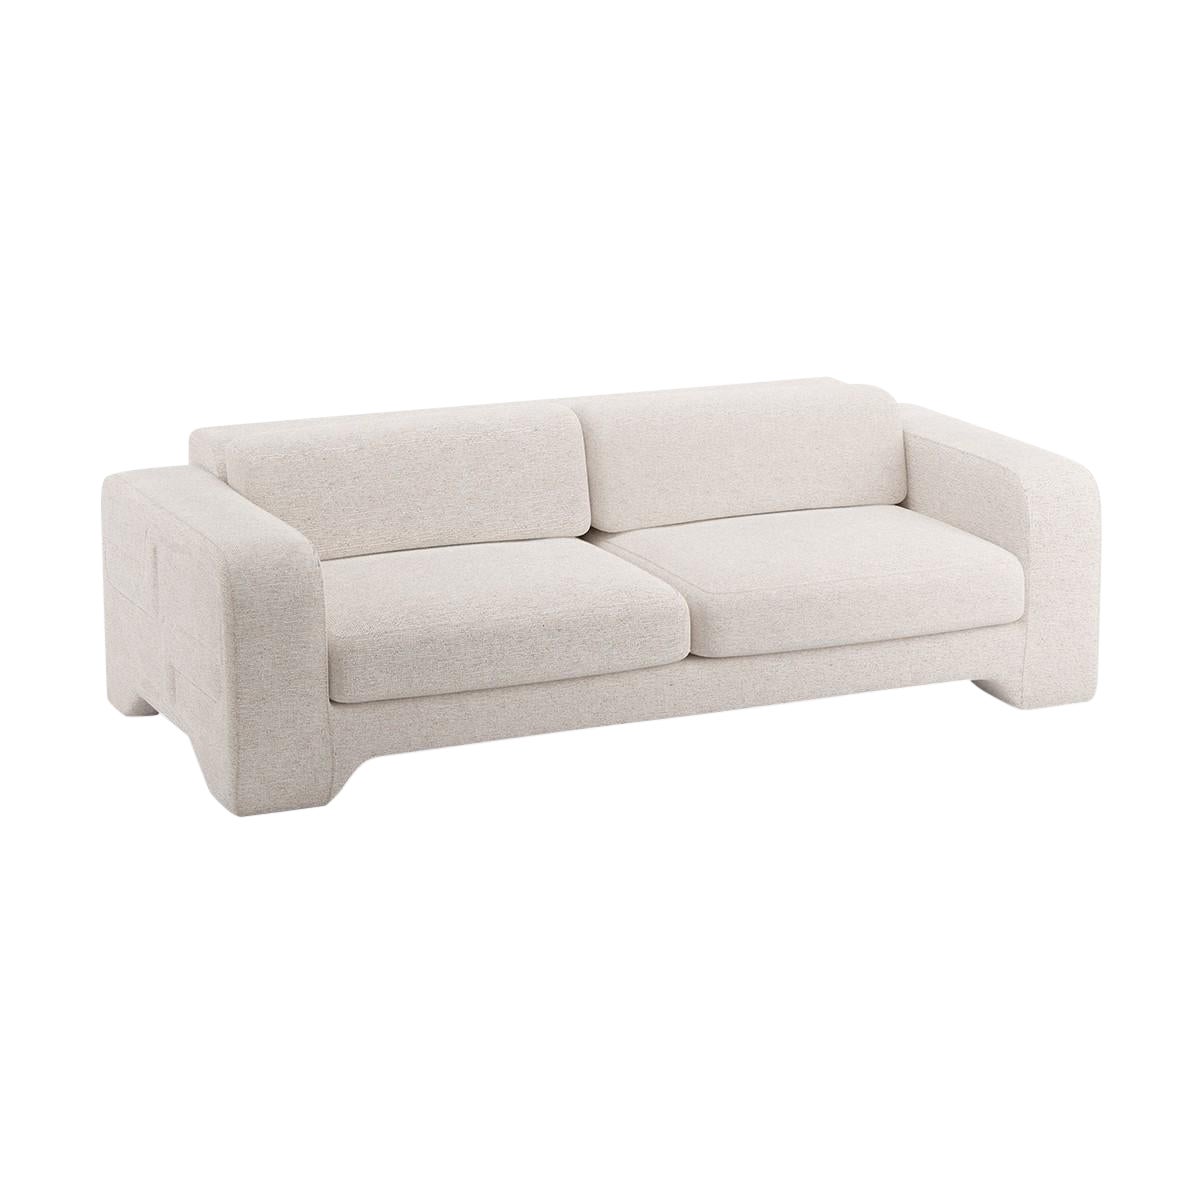 Popus Editions Giovanna 2.5 Seater Sofa in Otter Megeve Fabric with Knit Effect For Sale